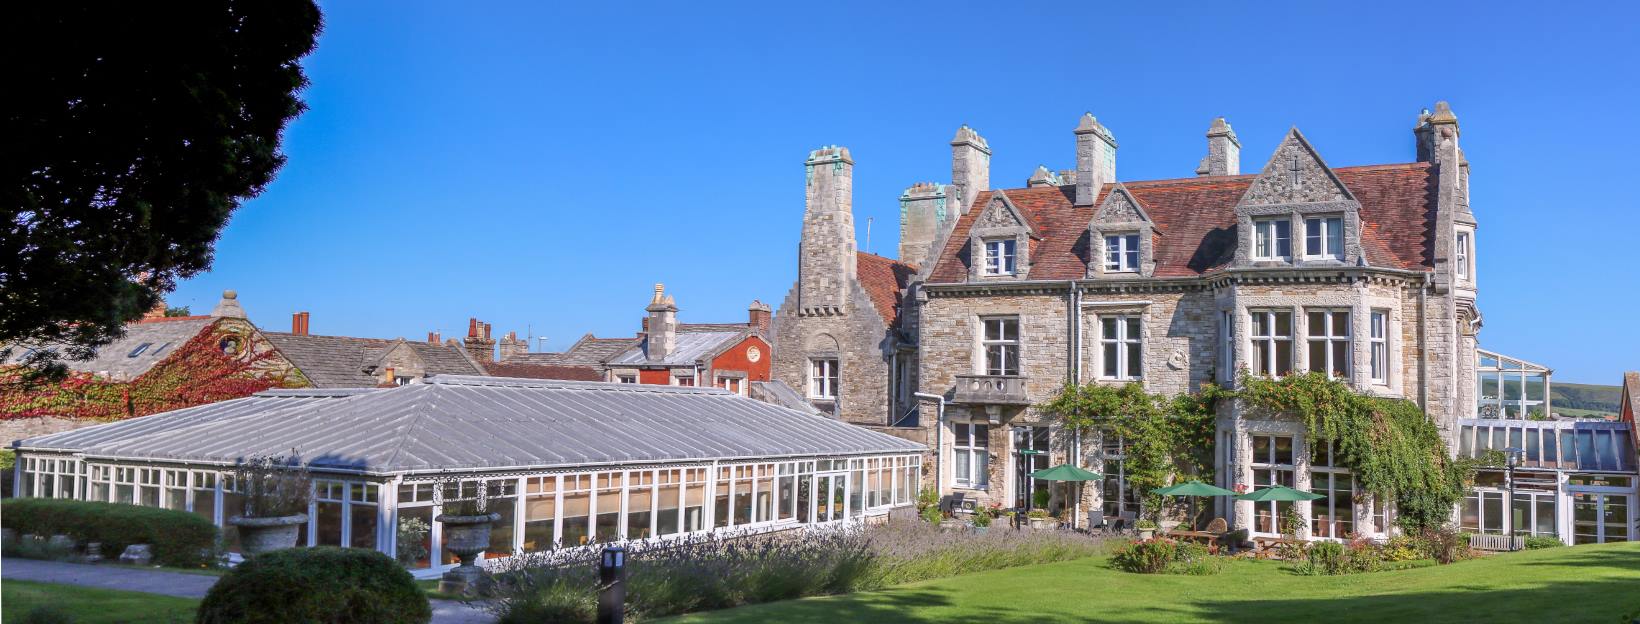 The Purbeck House Hotel